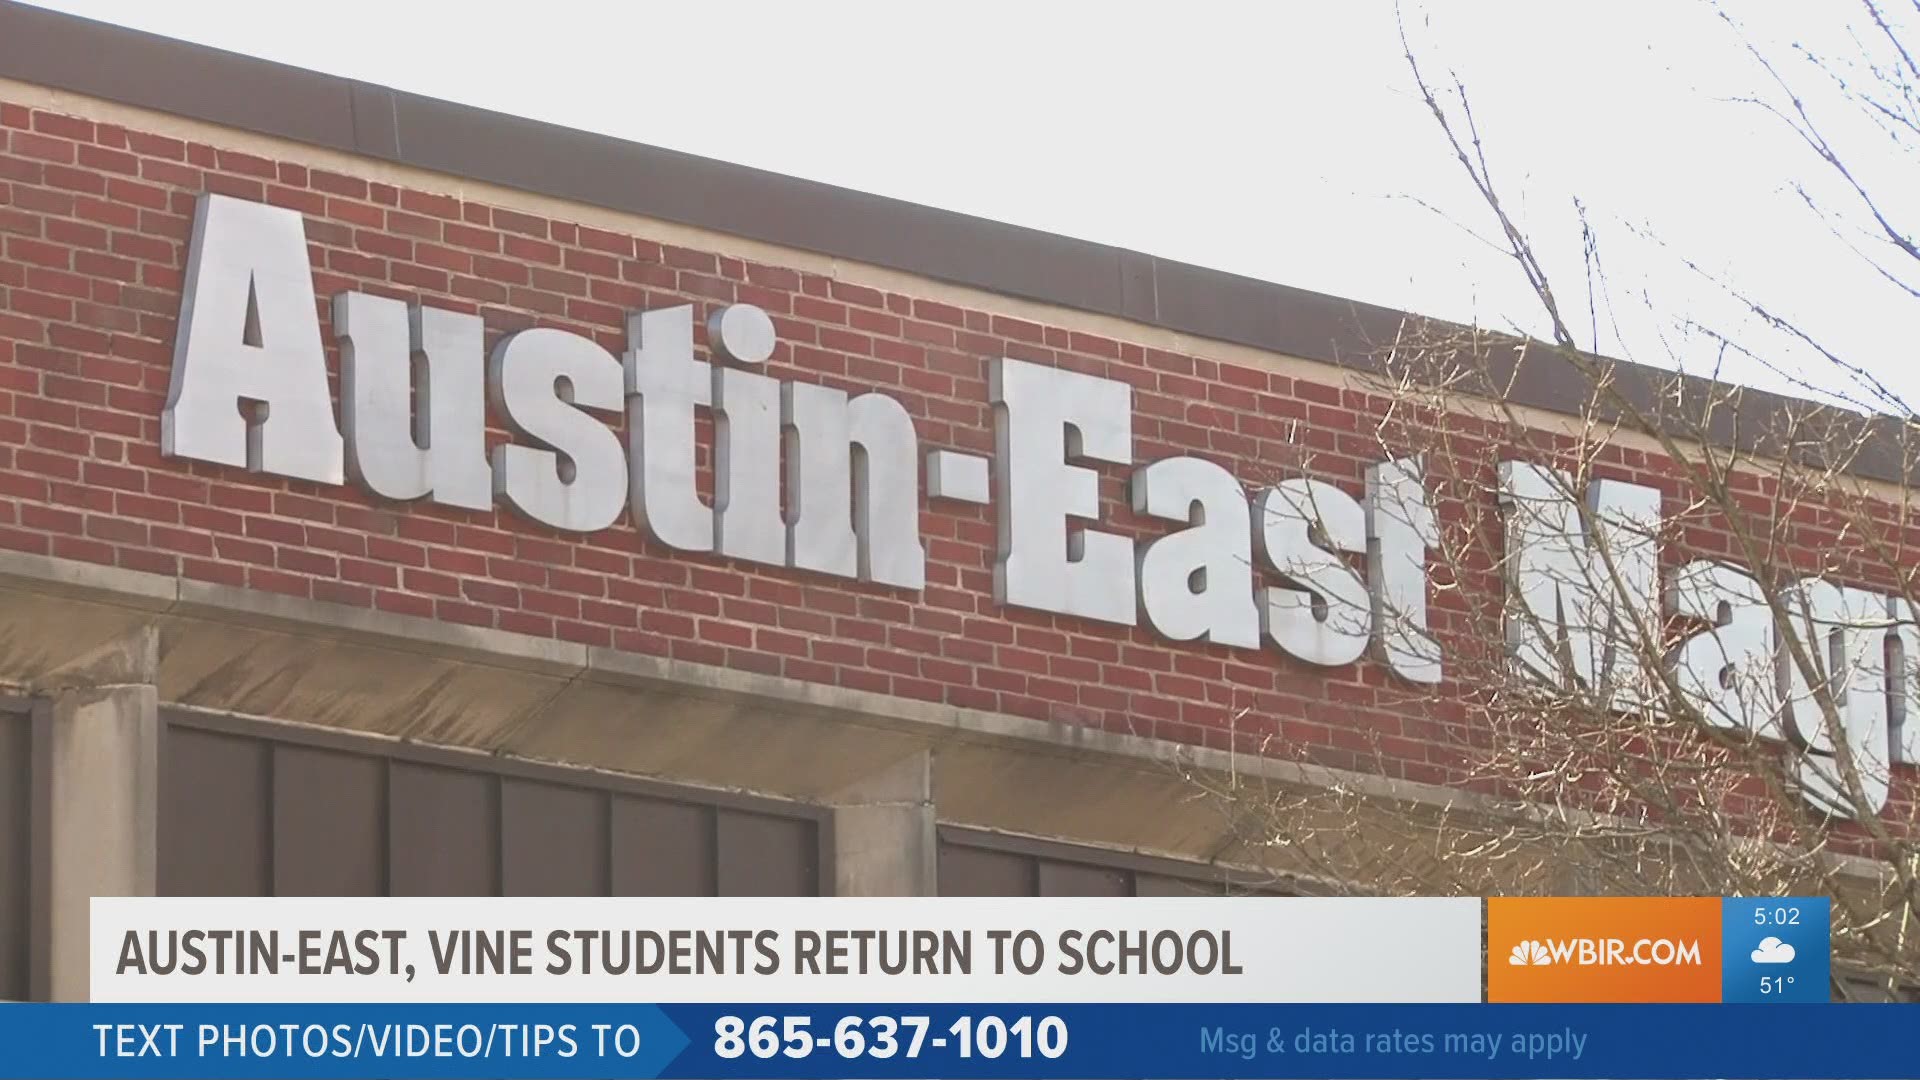 Classes were held virtually last week after three Austin-East students were shot and killed in three weeks.